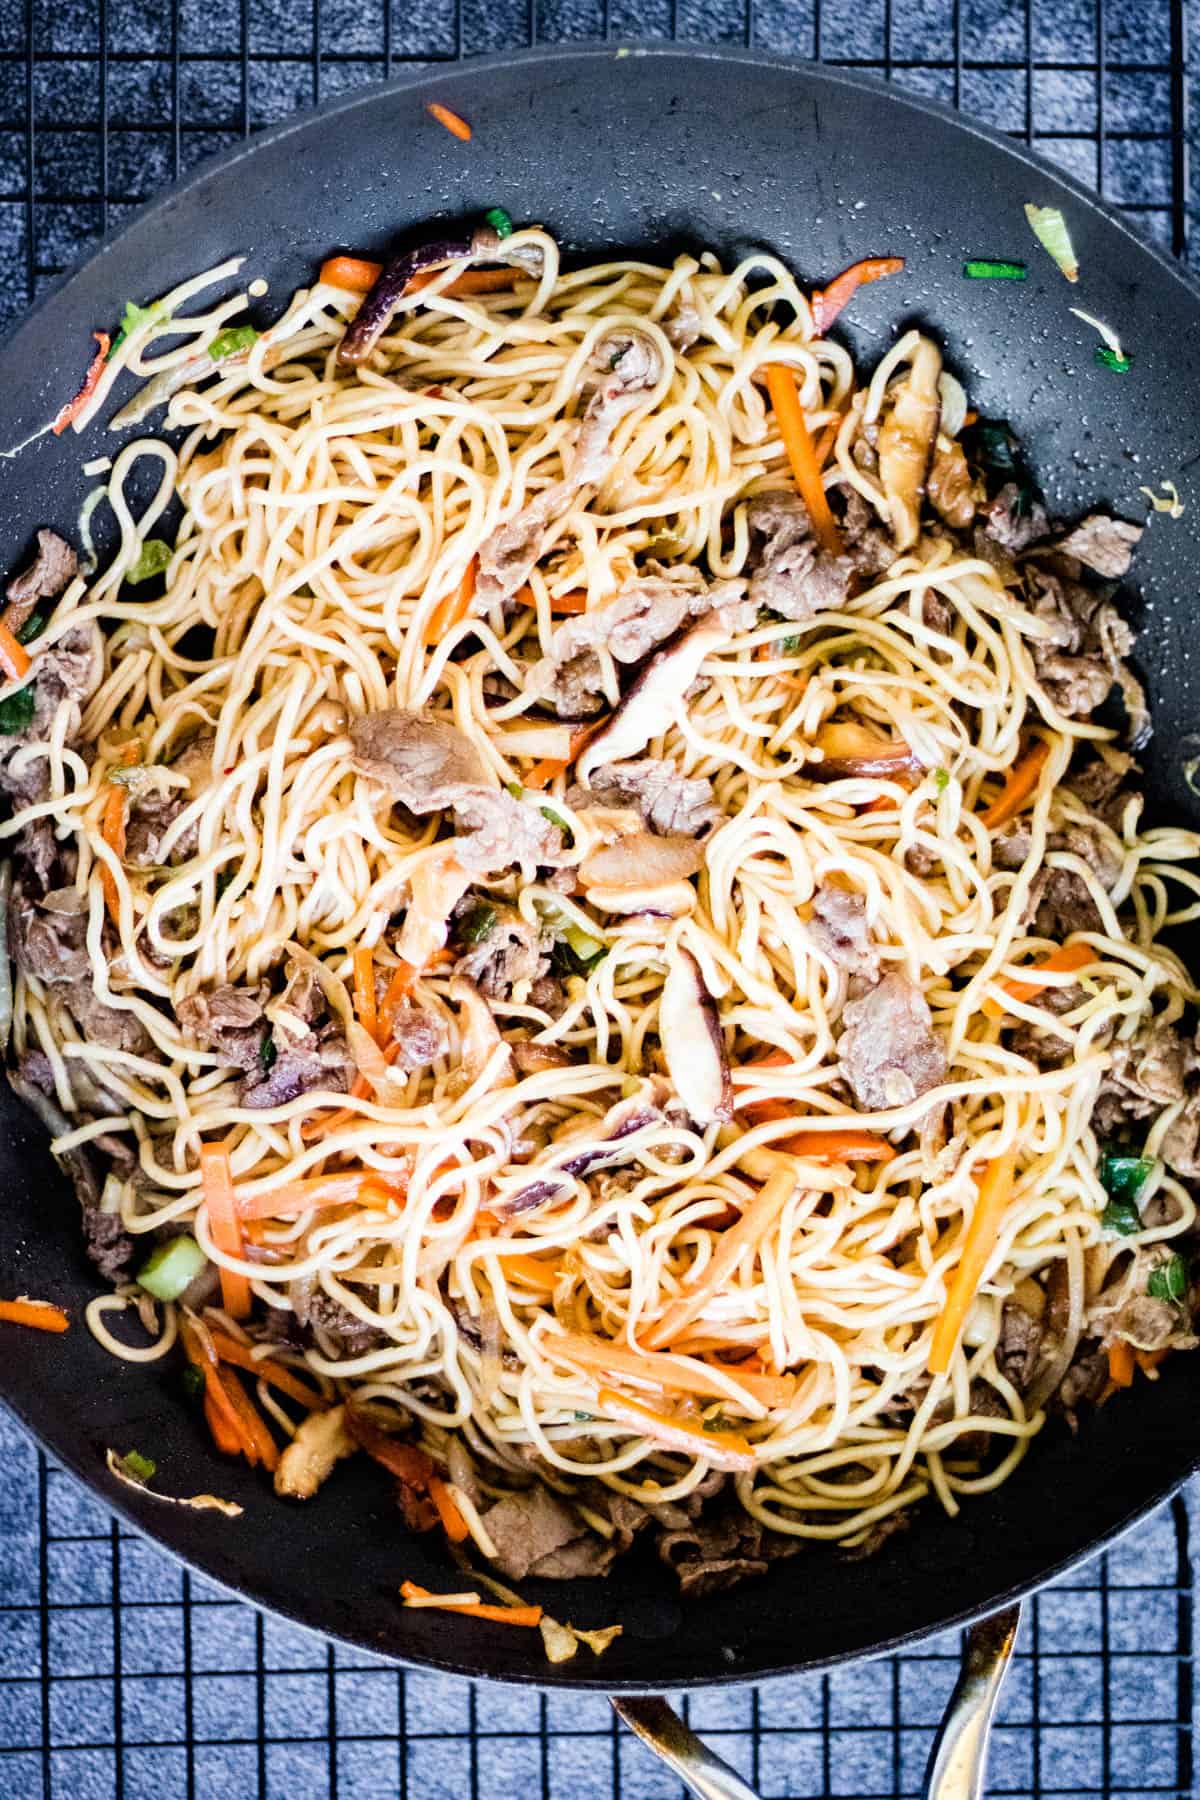 A beef yakisoba with noodles, meat and vegetables.